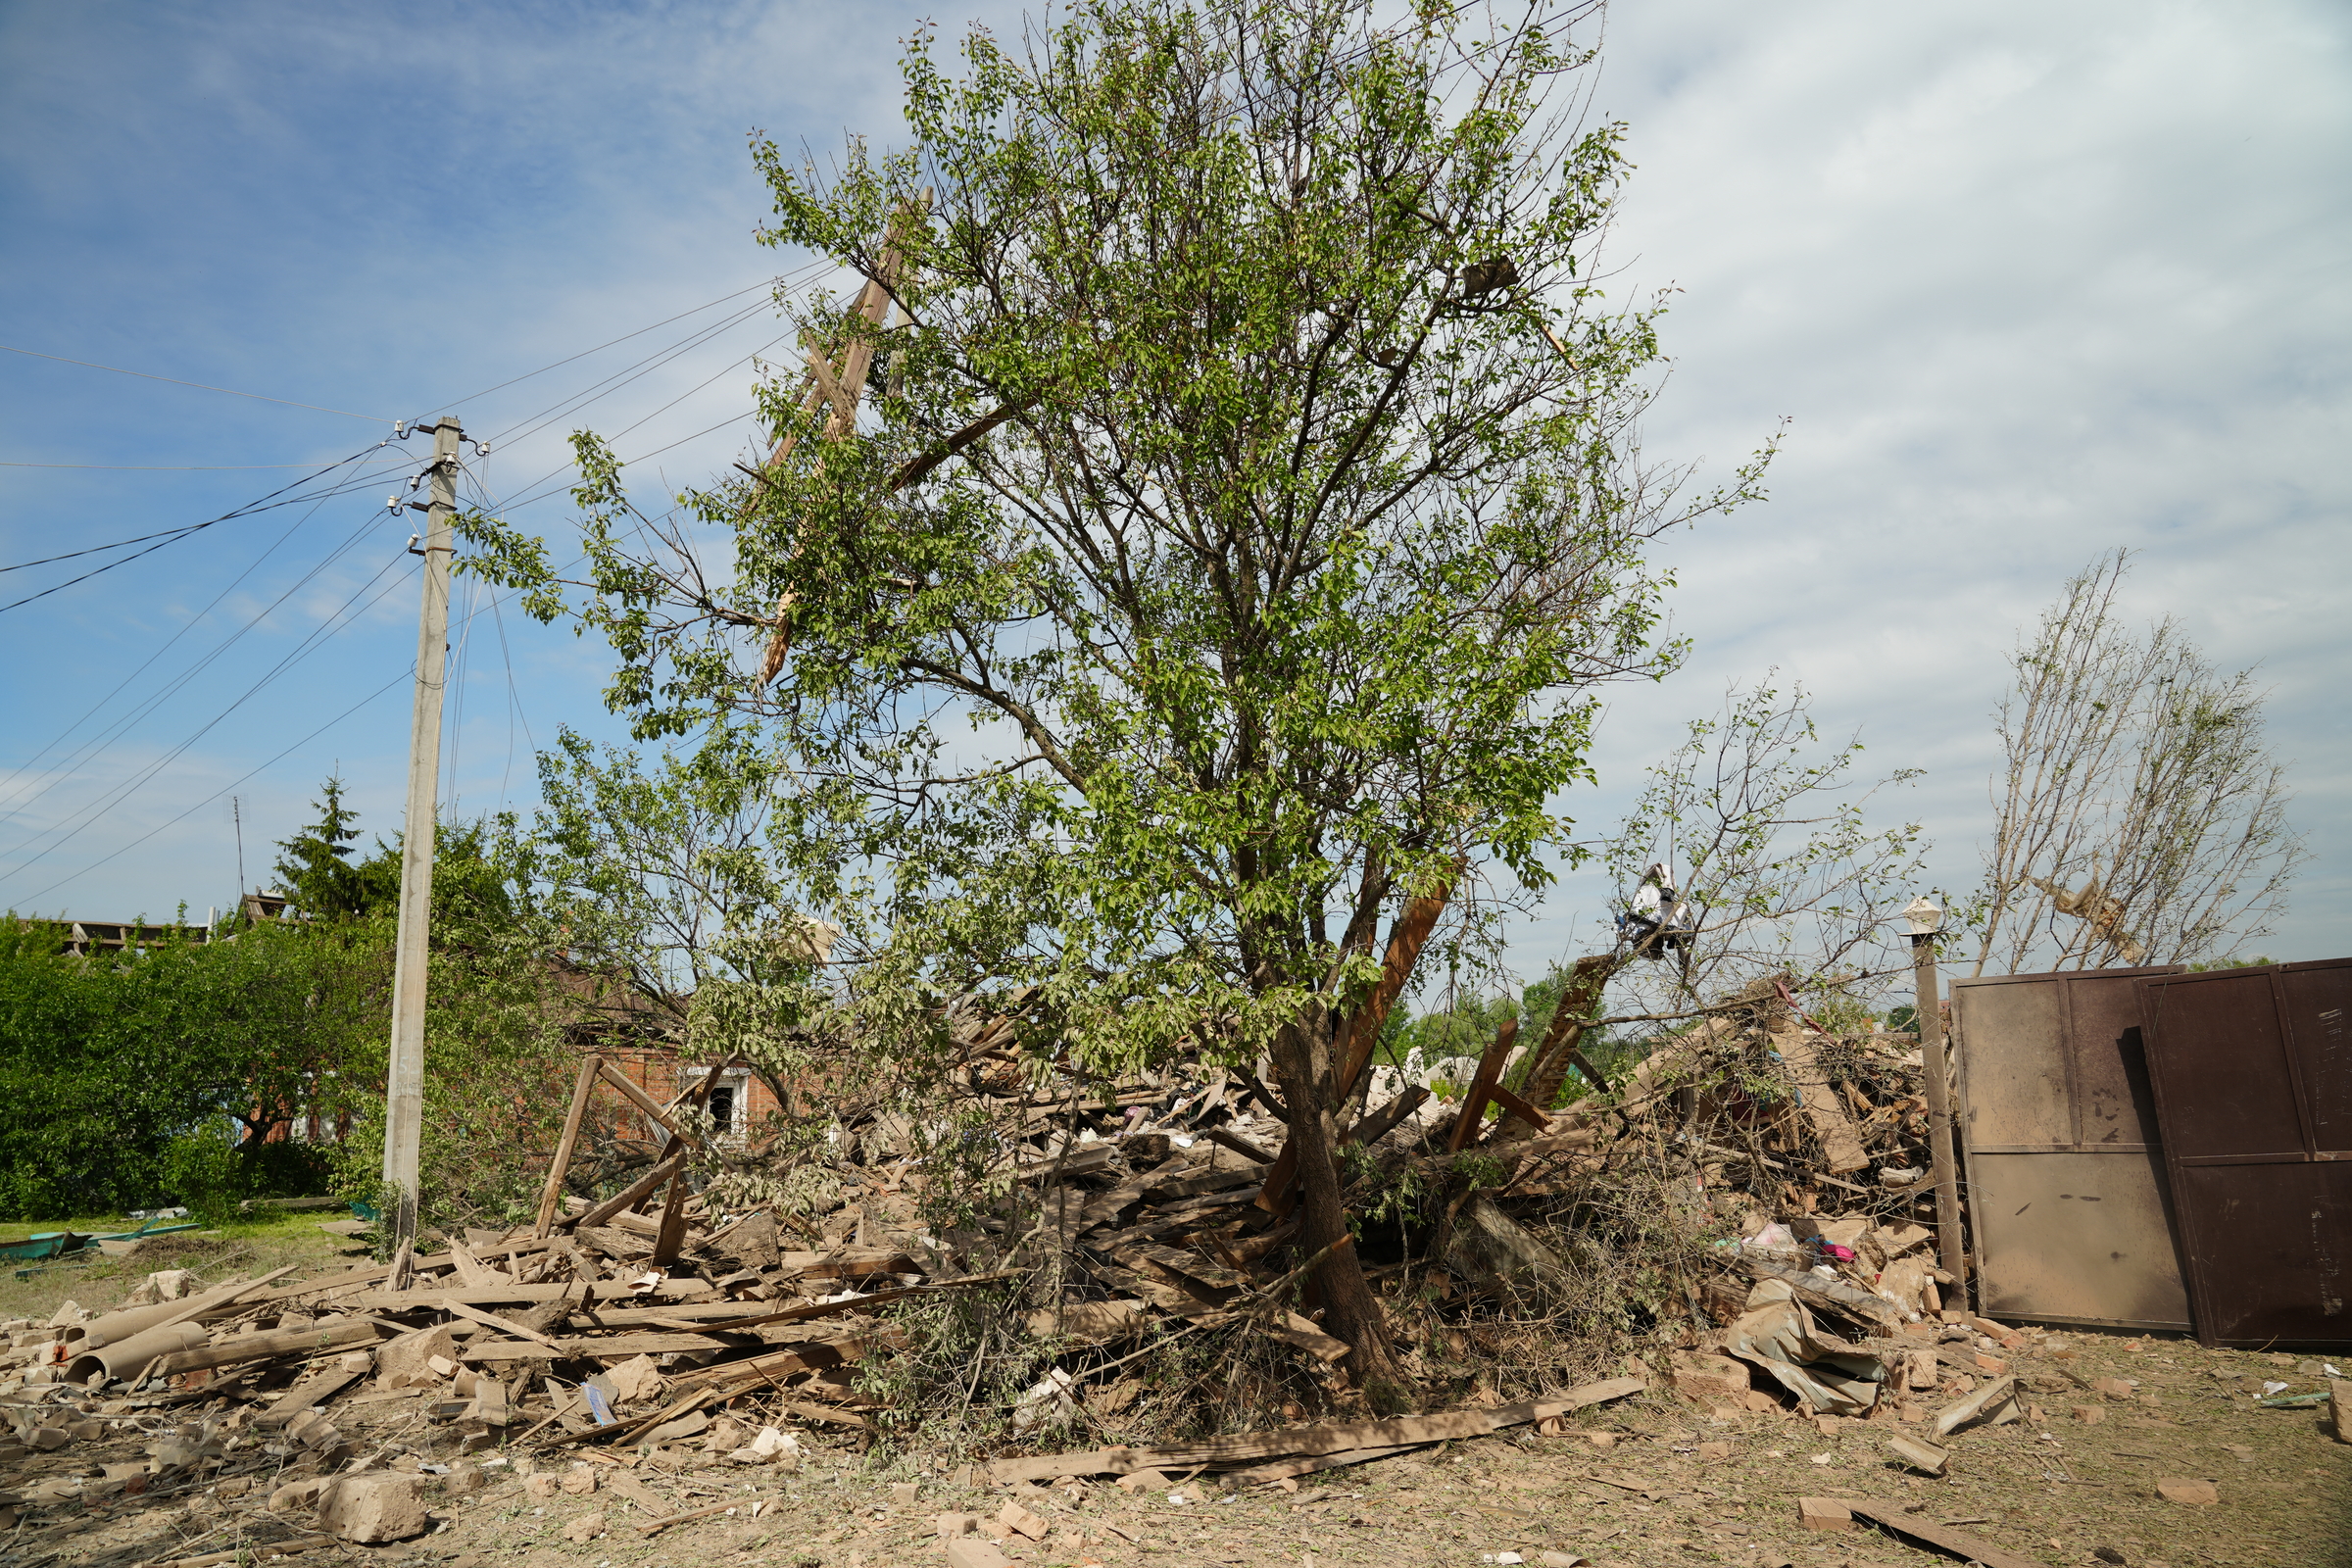 A tree near Serhii's destroyed house, also damaged by the direct hit of a glide bomb / Photo: Yana Sliemzina for Gwara Media